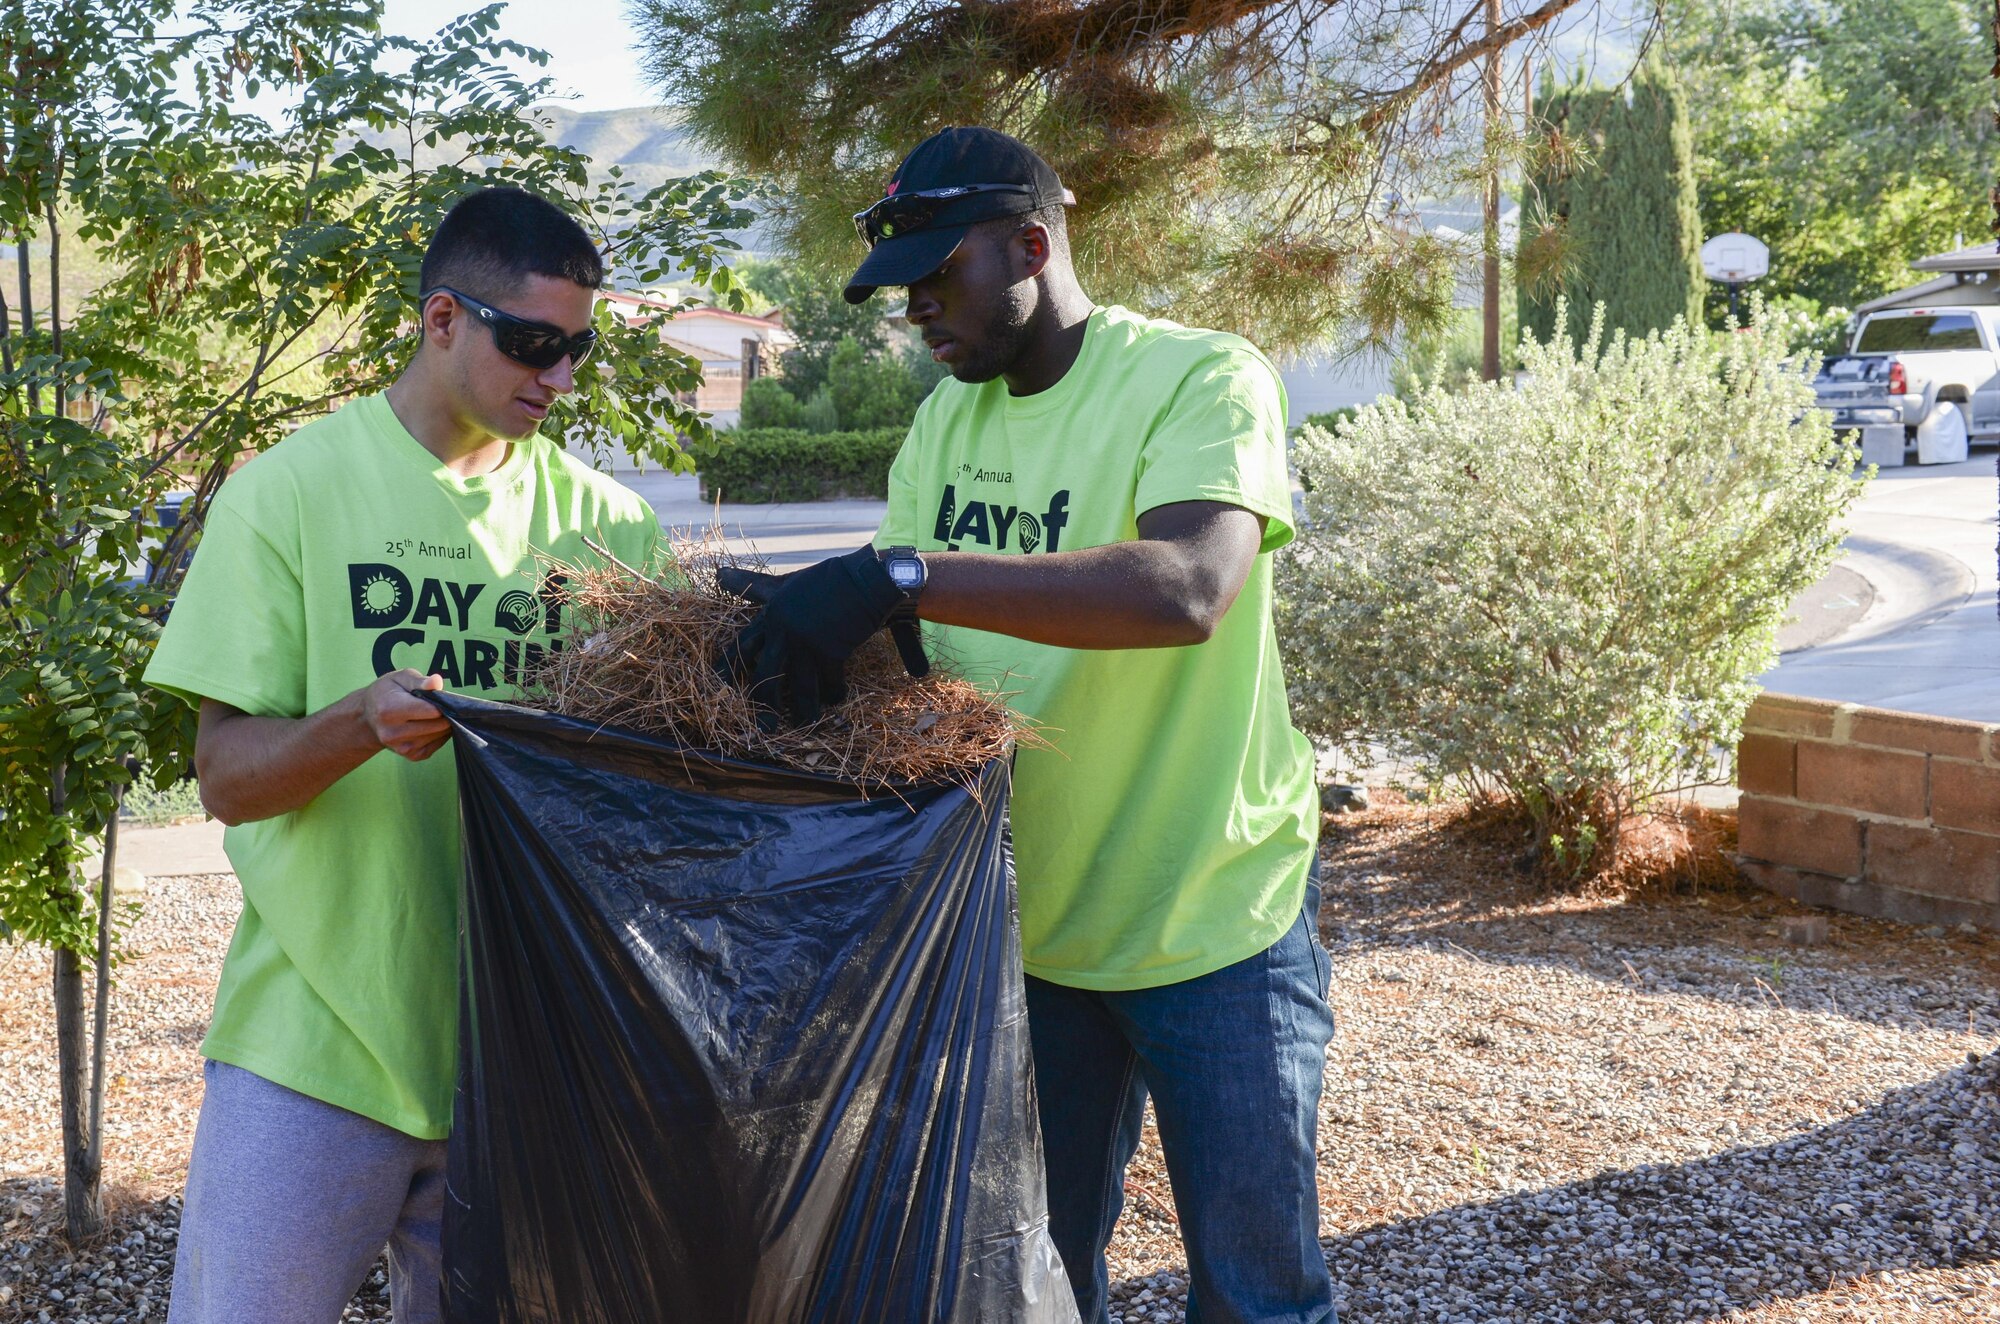 Airmen 1st Class Michael and Michael, Day of Caring volunteers, who are both heating, ventilation and air conditioning technicians with the 49th Civil Engineer Squadron here, gather pine needles from a disabled resident’s front lawn in Alamogordo, N.M. on Sept. 9, 2016. The annual Day of Caring volunteer event helps disabled individuals and senior citizens within the Otero County community. (Last names are being withheld due to operational requirements. U.S. Air Force photo by Airman Alexis P. Docherty)